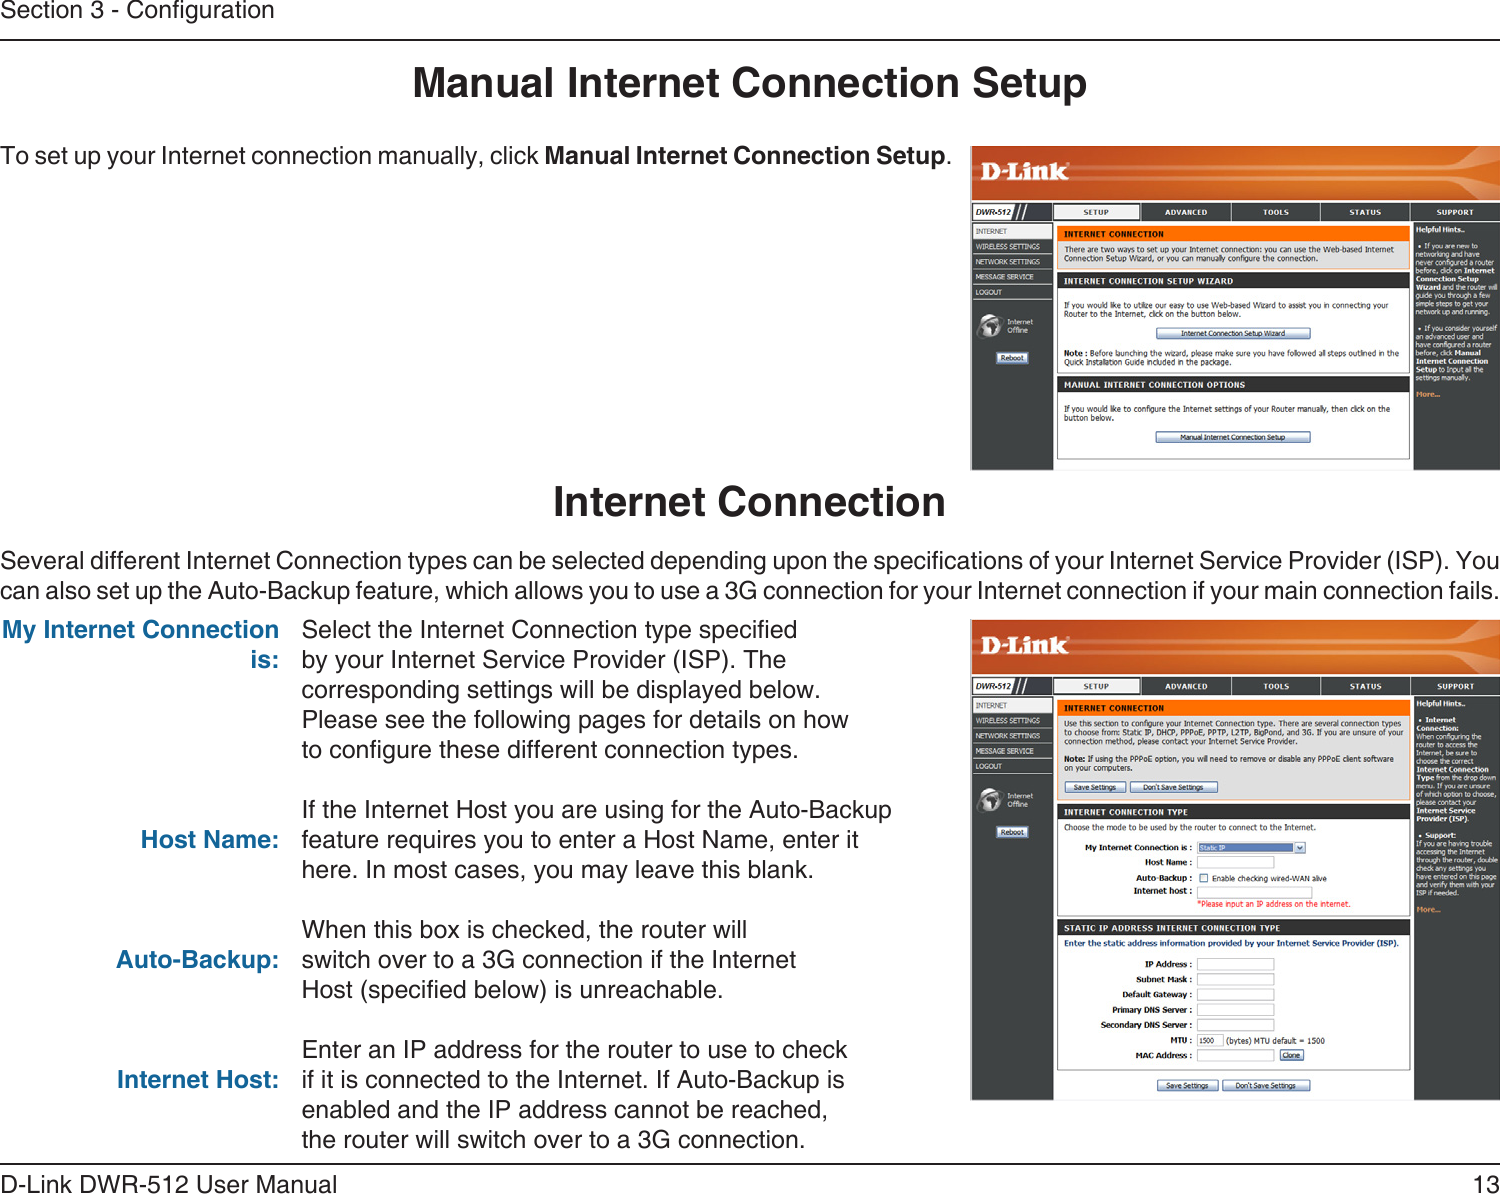 13D-Link DWR-512 User ManualSection 3 - CongurationManual Internet Connection SetupTo set up your Internet connection manually, click Manual Internet Connection Setup.Several different Internet Connection types can be selected depending upon the specications of your Internet Service Provider (ISP). You can also set up the Auto-Backup feature, which allows you to use a 3G connection for your Internet connection if your main connection fails.Internet ConnectionSelect the Internet Connection type specied by your Internet Service Provider (ISP). The corresponding settings will be displayed below. Please see the following pages for details on how to congure these different connection types. If the Internet Host you are using for the Auto-Backup feature requires you to enter a Host Name, enter it here. In most cases, you may leave this blank.When this box is checked, the router will switch over to a 3G connection if the Internet Host (specied below) is unreachable.Enter an IP address for the router to use to check if it is connected to the Internet. If Auto-Backup is enabled and the IP address cannot be reached, the router will switch over to a 3G connection.My Internet Connection is:Host Name:Auto-Backup:Internet Host: